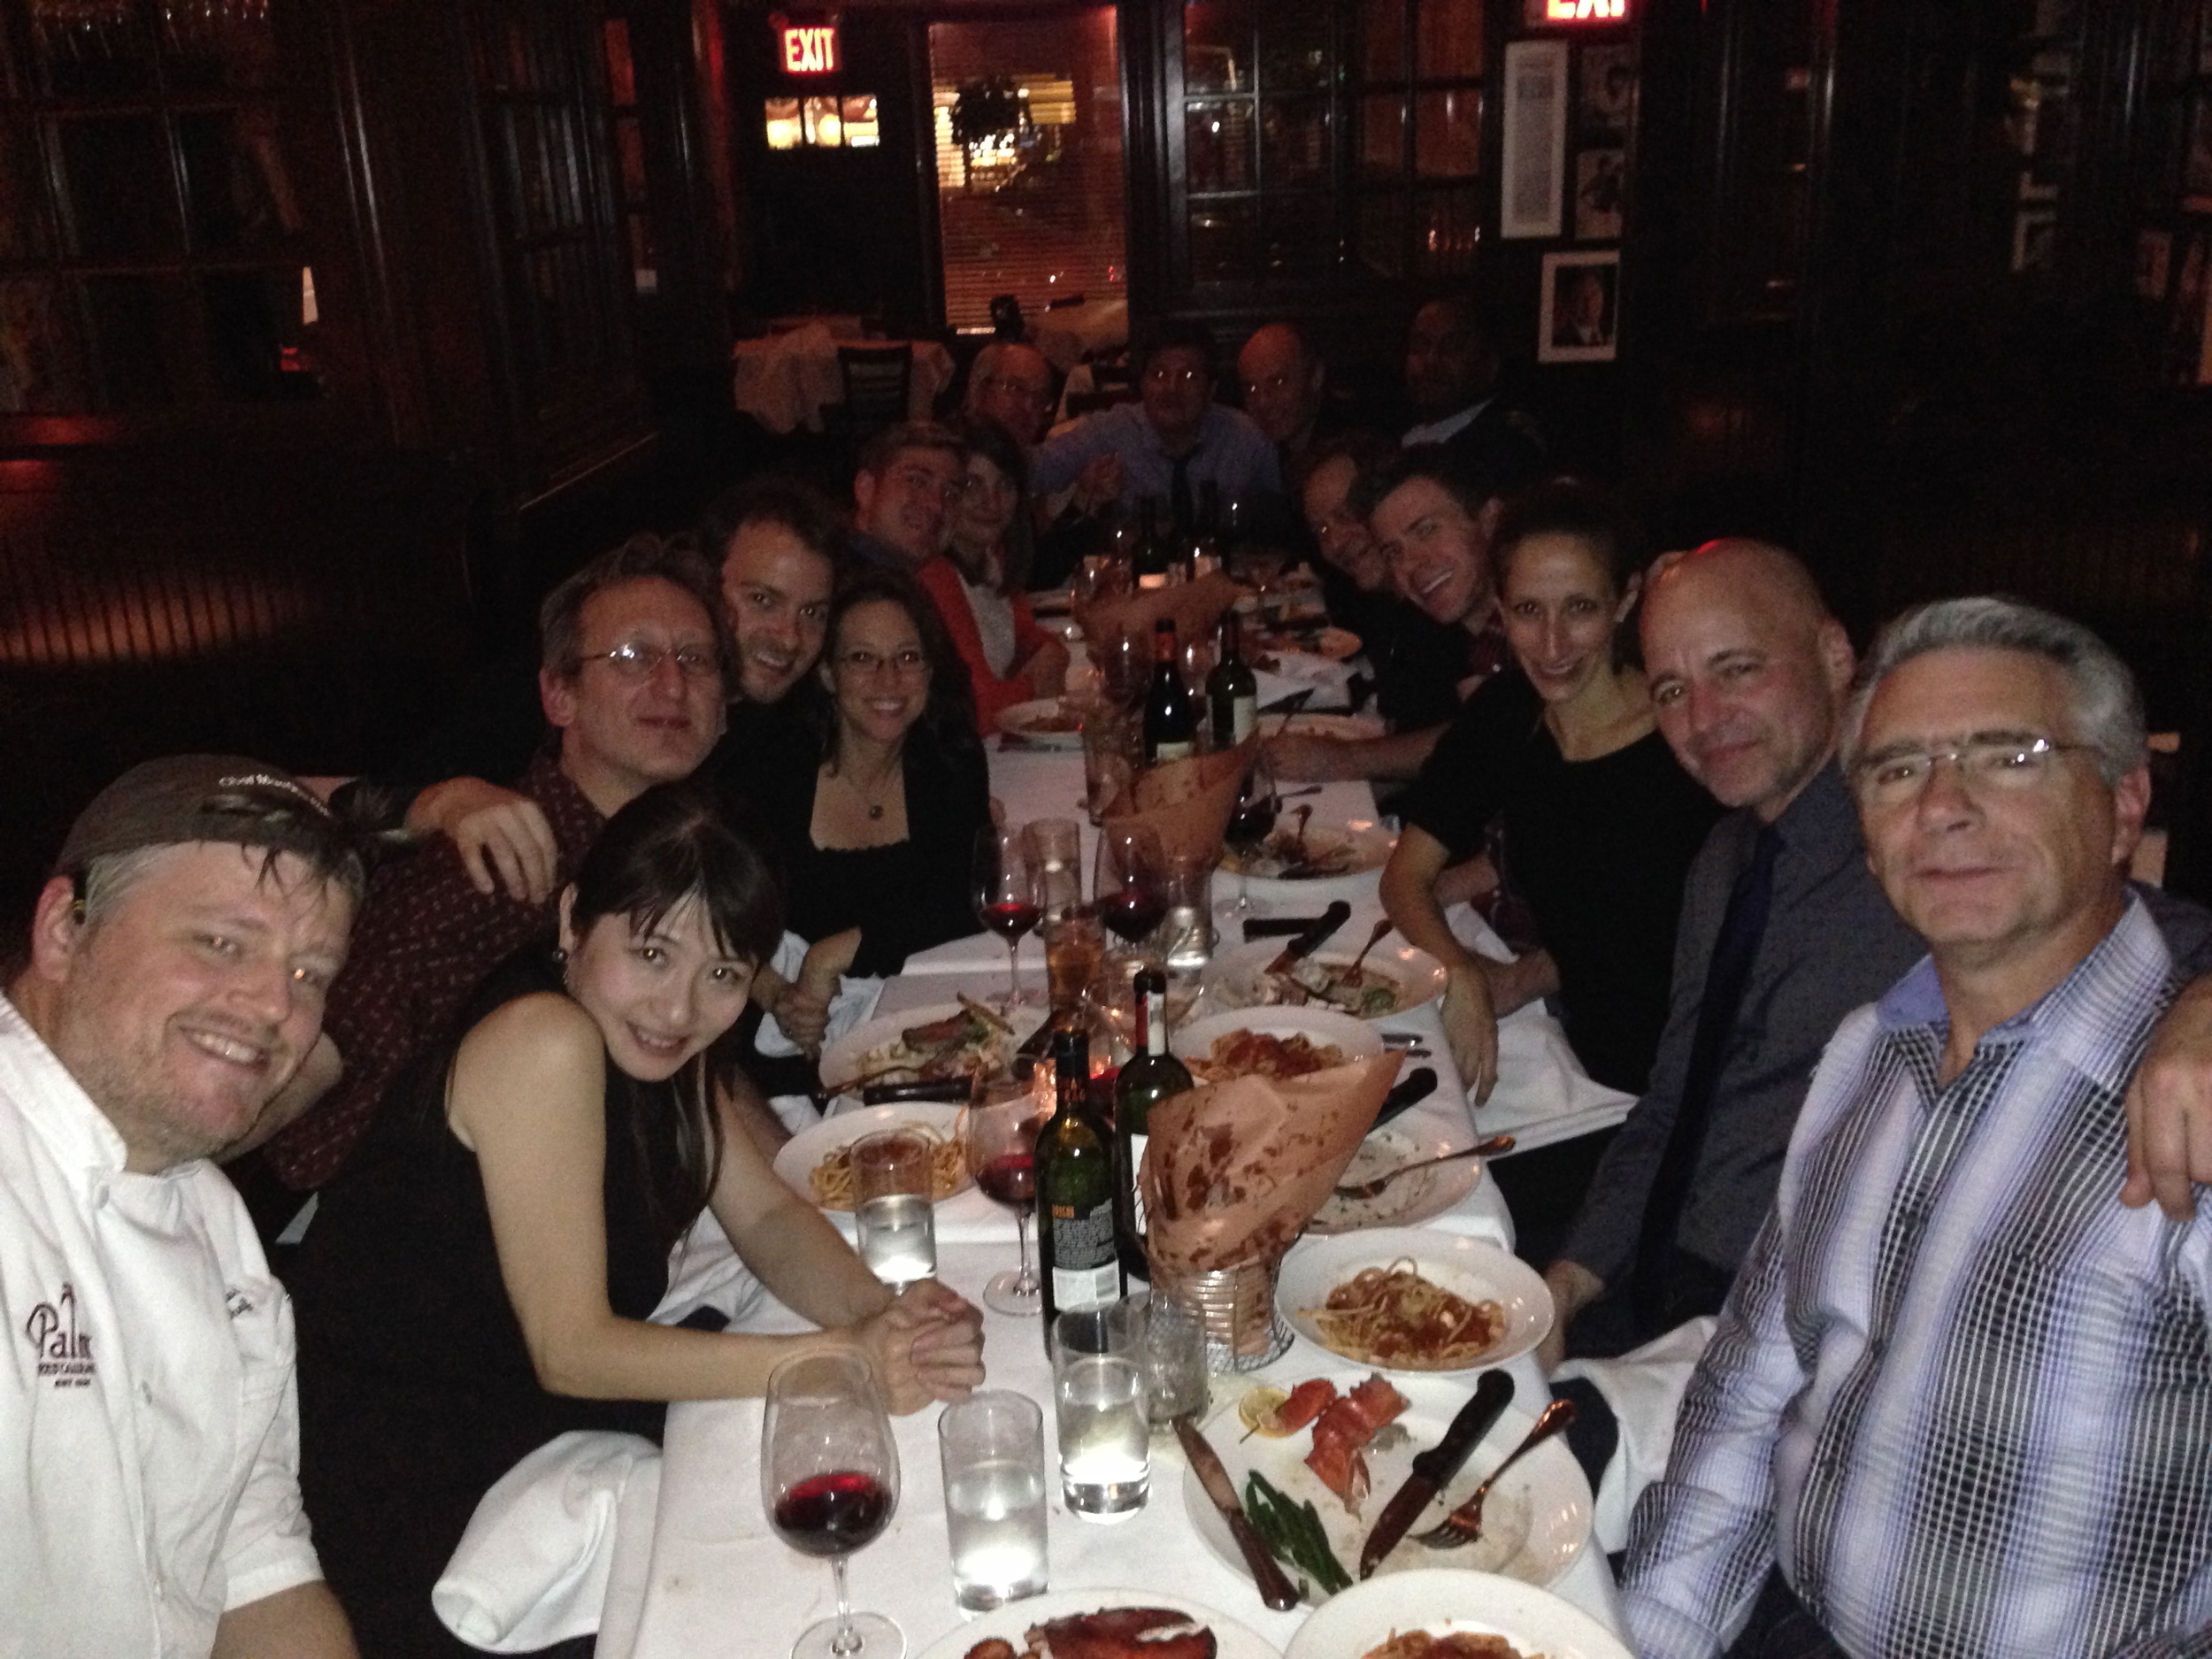 Kinky Boots band dinner at the Palm Too.